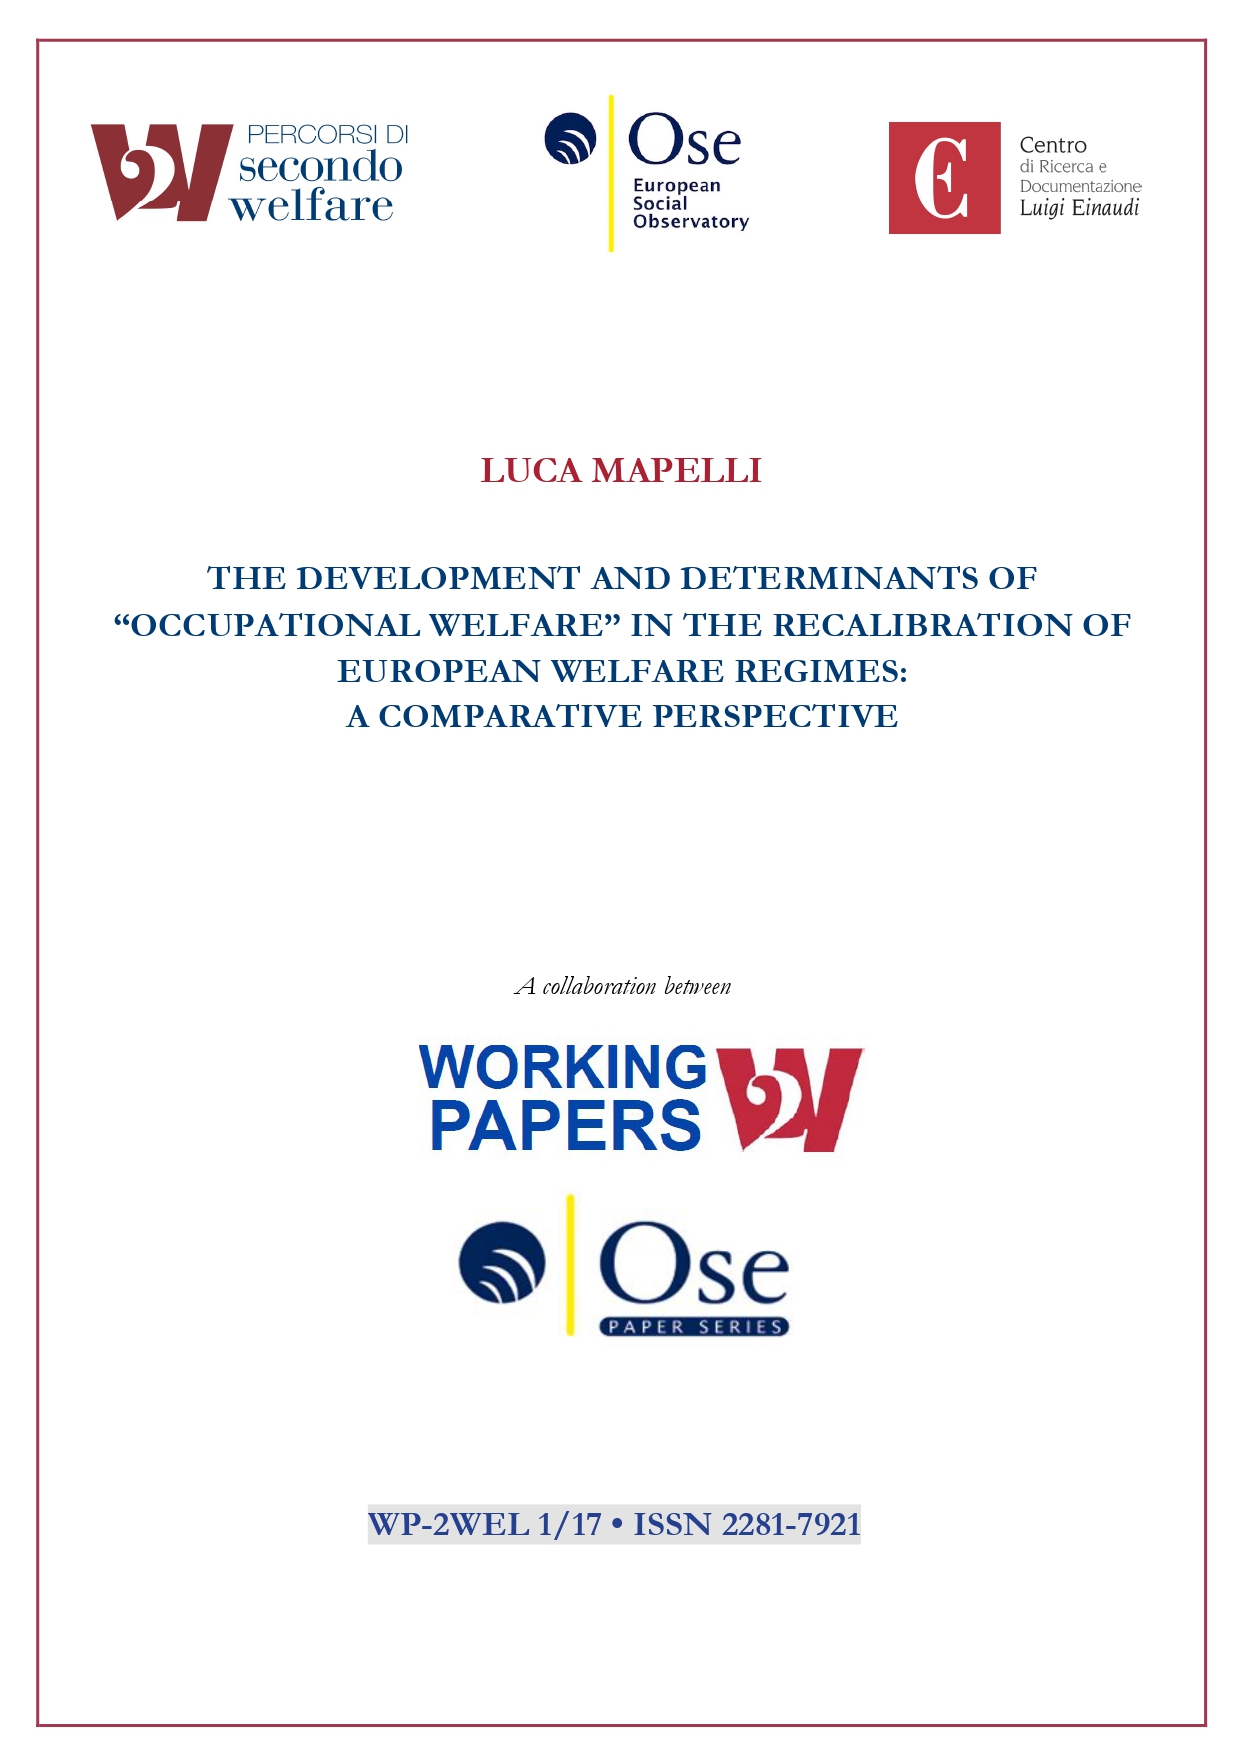 The Development and Determinants of “Occupational Welfare” in the Recalibration of European Welfare Regimes: a Comparative Perspective